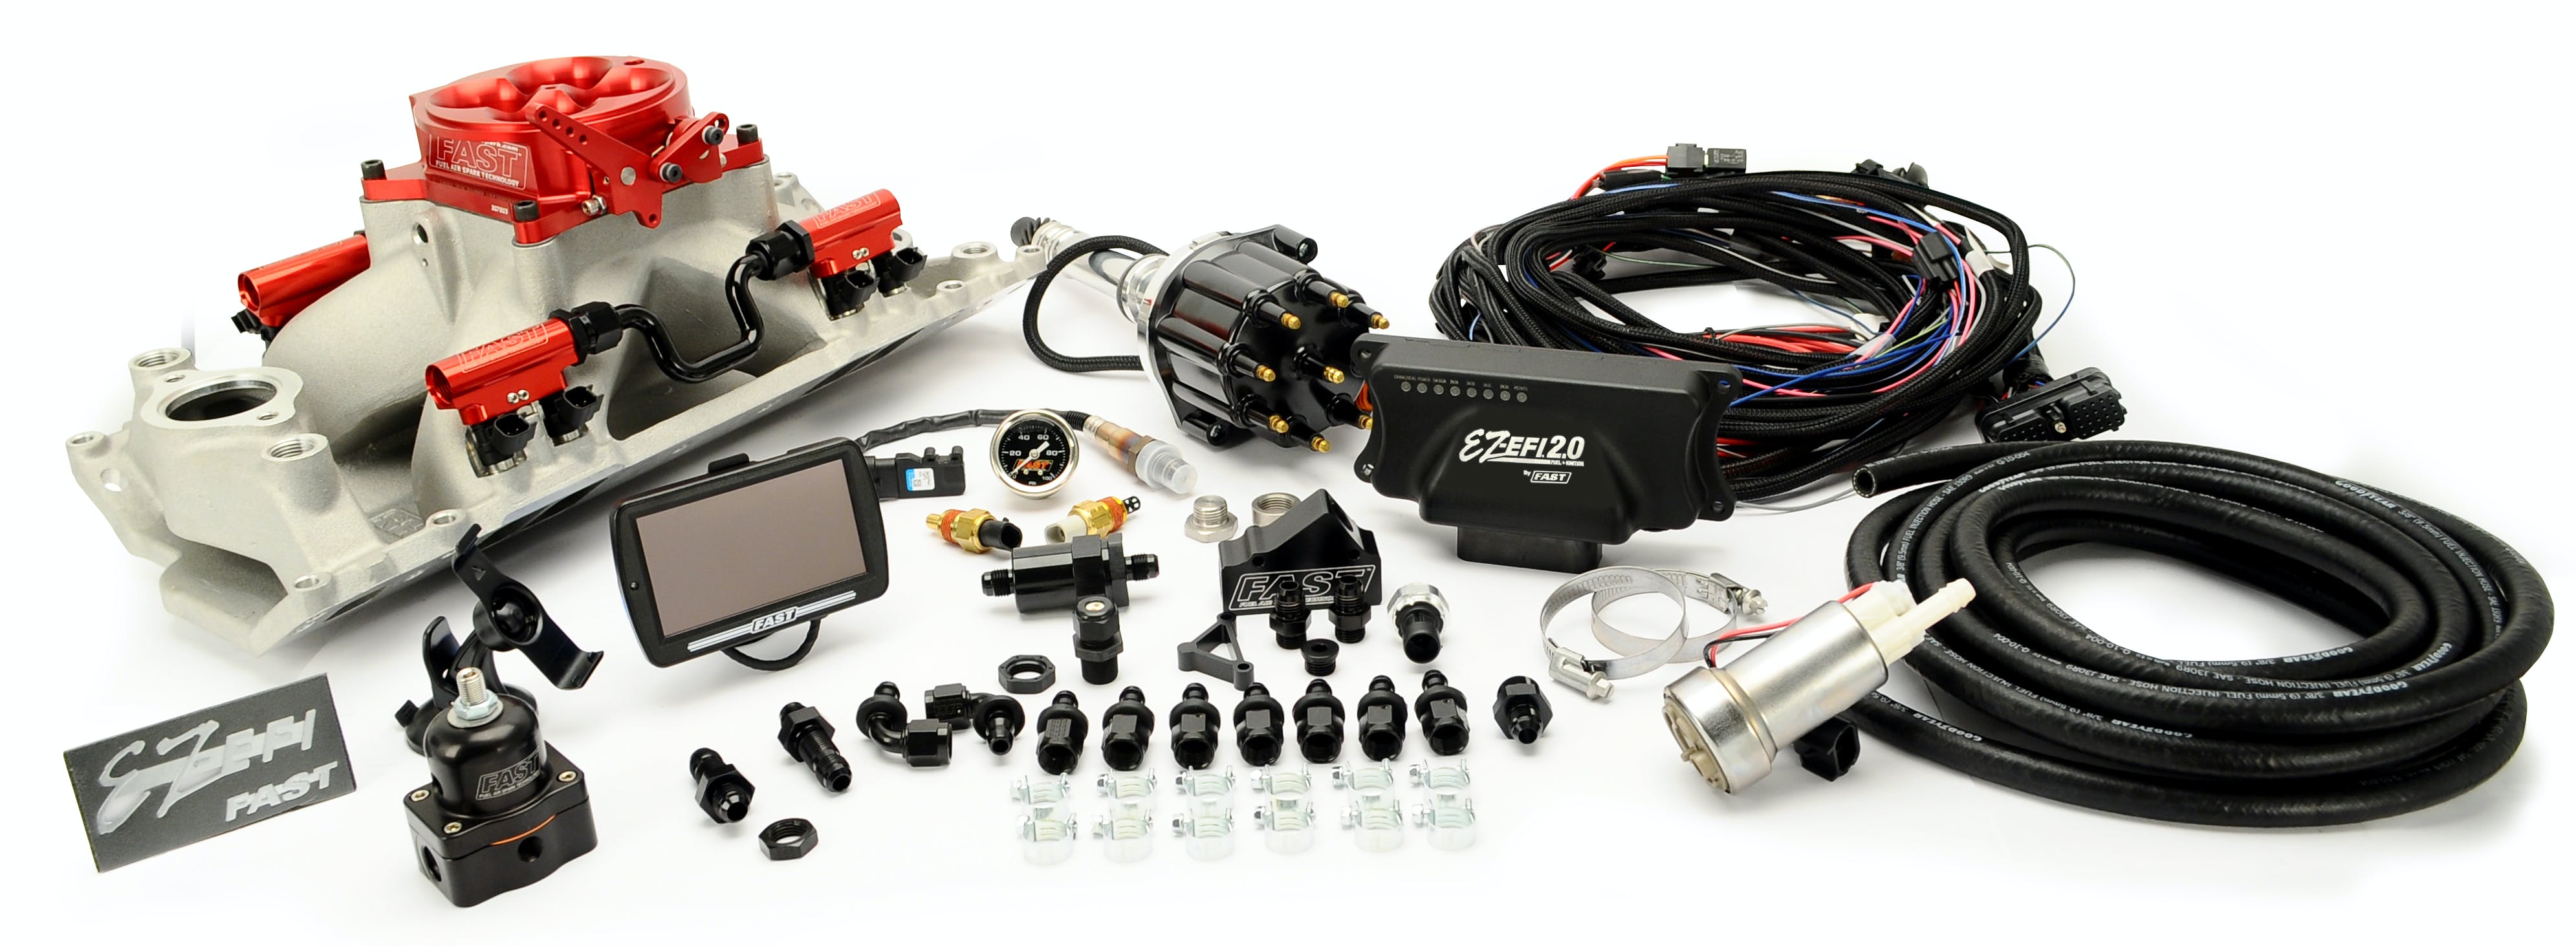 FAST - Fuel Air Spark Technology 30412-05T EZ 2.0 SBC Multiport w/intake, rails, throttle body, distributor and fuel pump